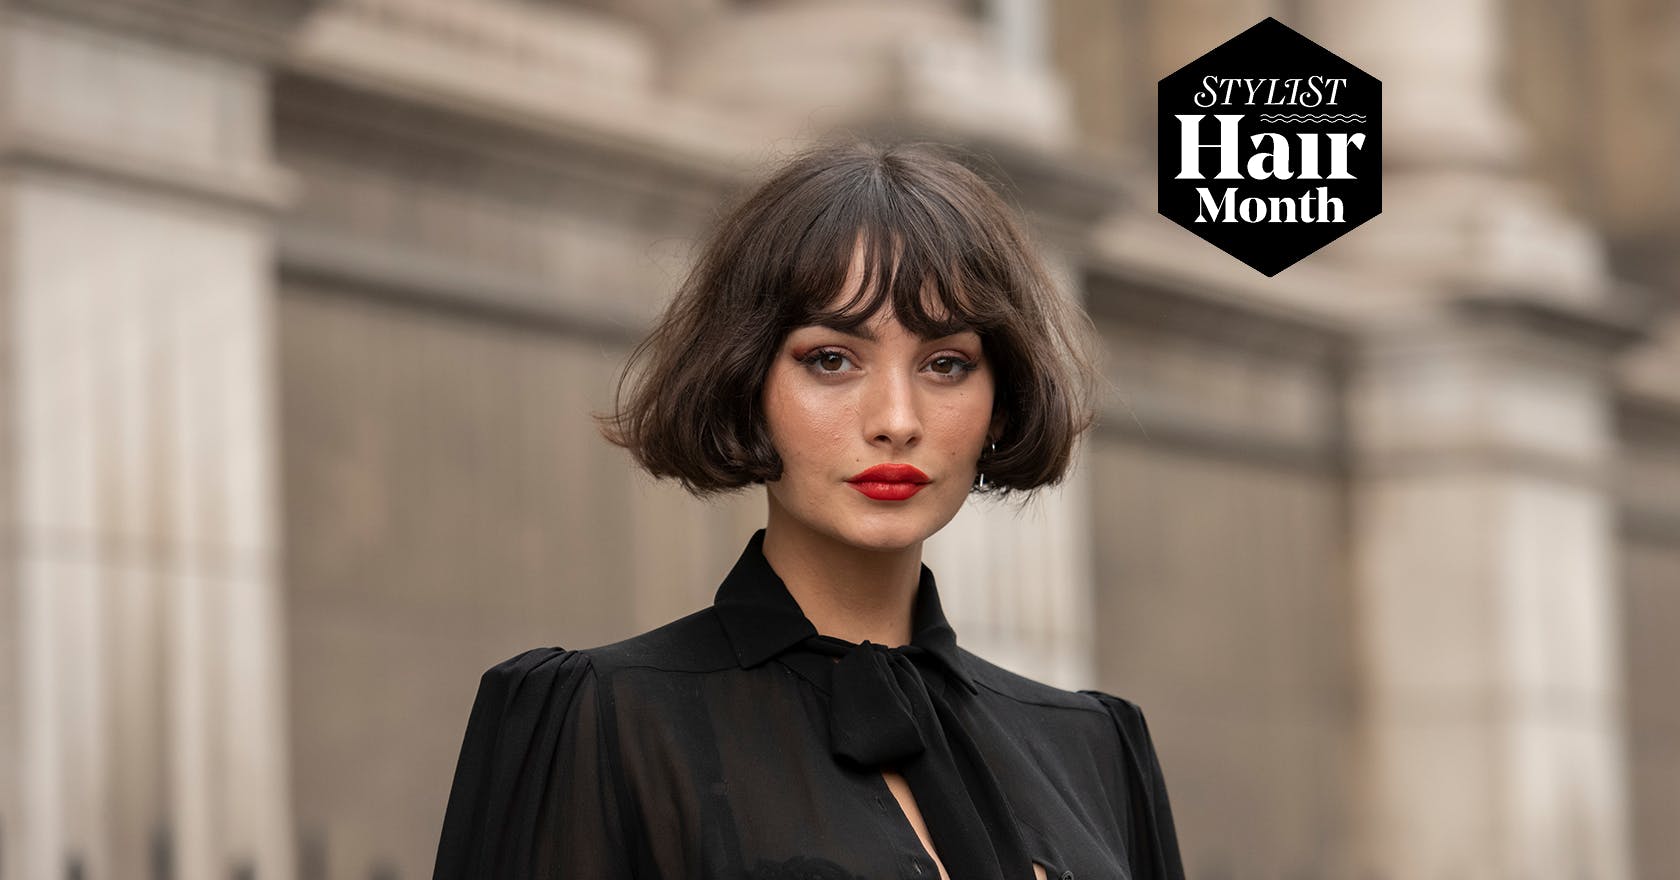 The trending French bob haircut epitomises cool girl glamour